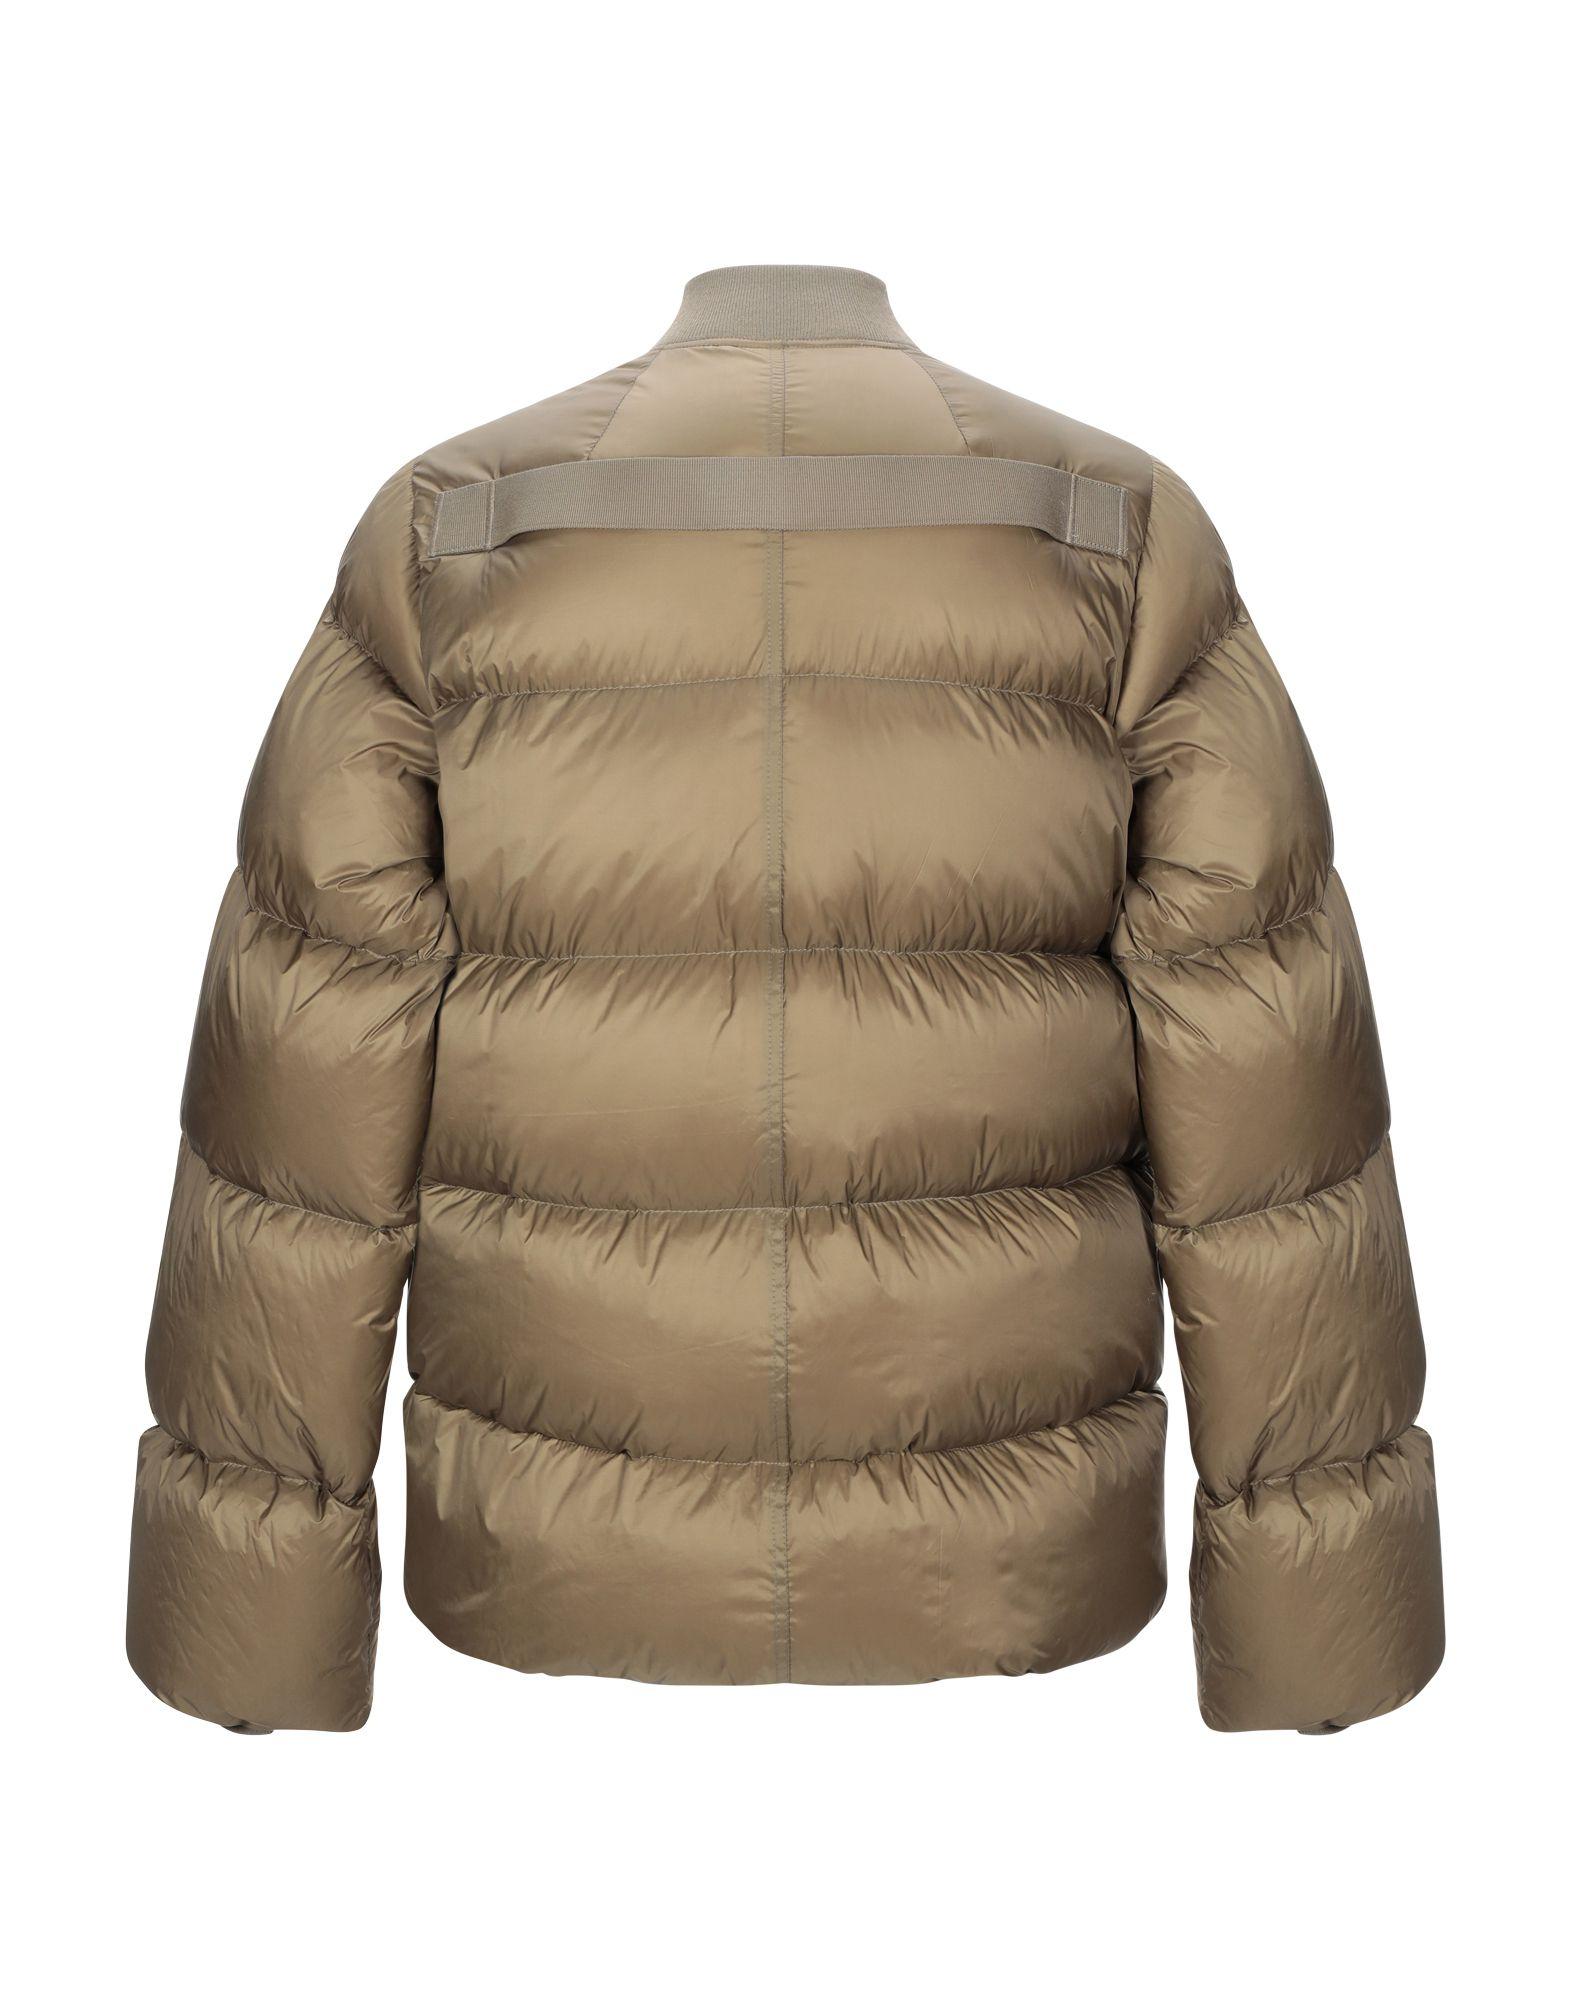 Rick Owens Synthetic Down Jacket in Military Green (Green) for Men - Lyst